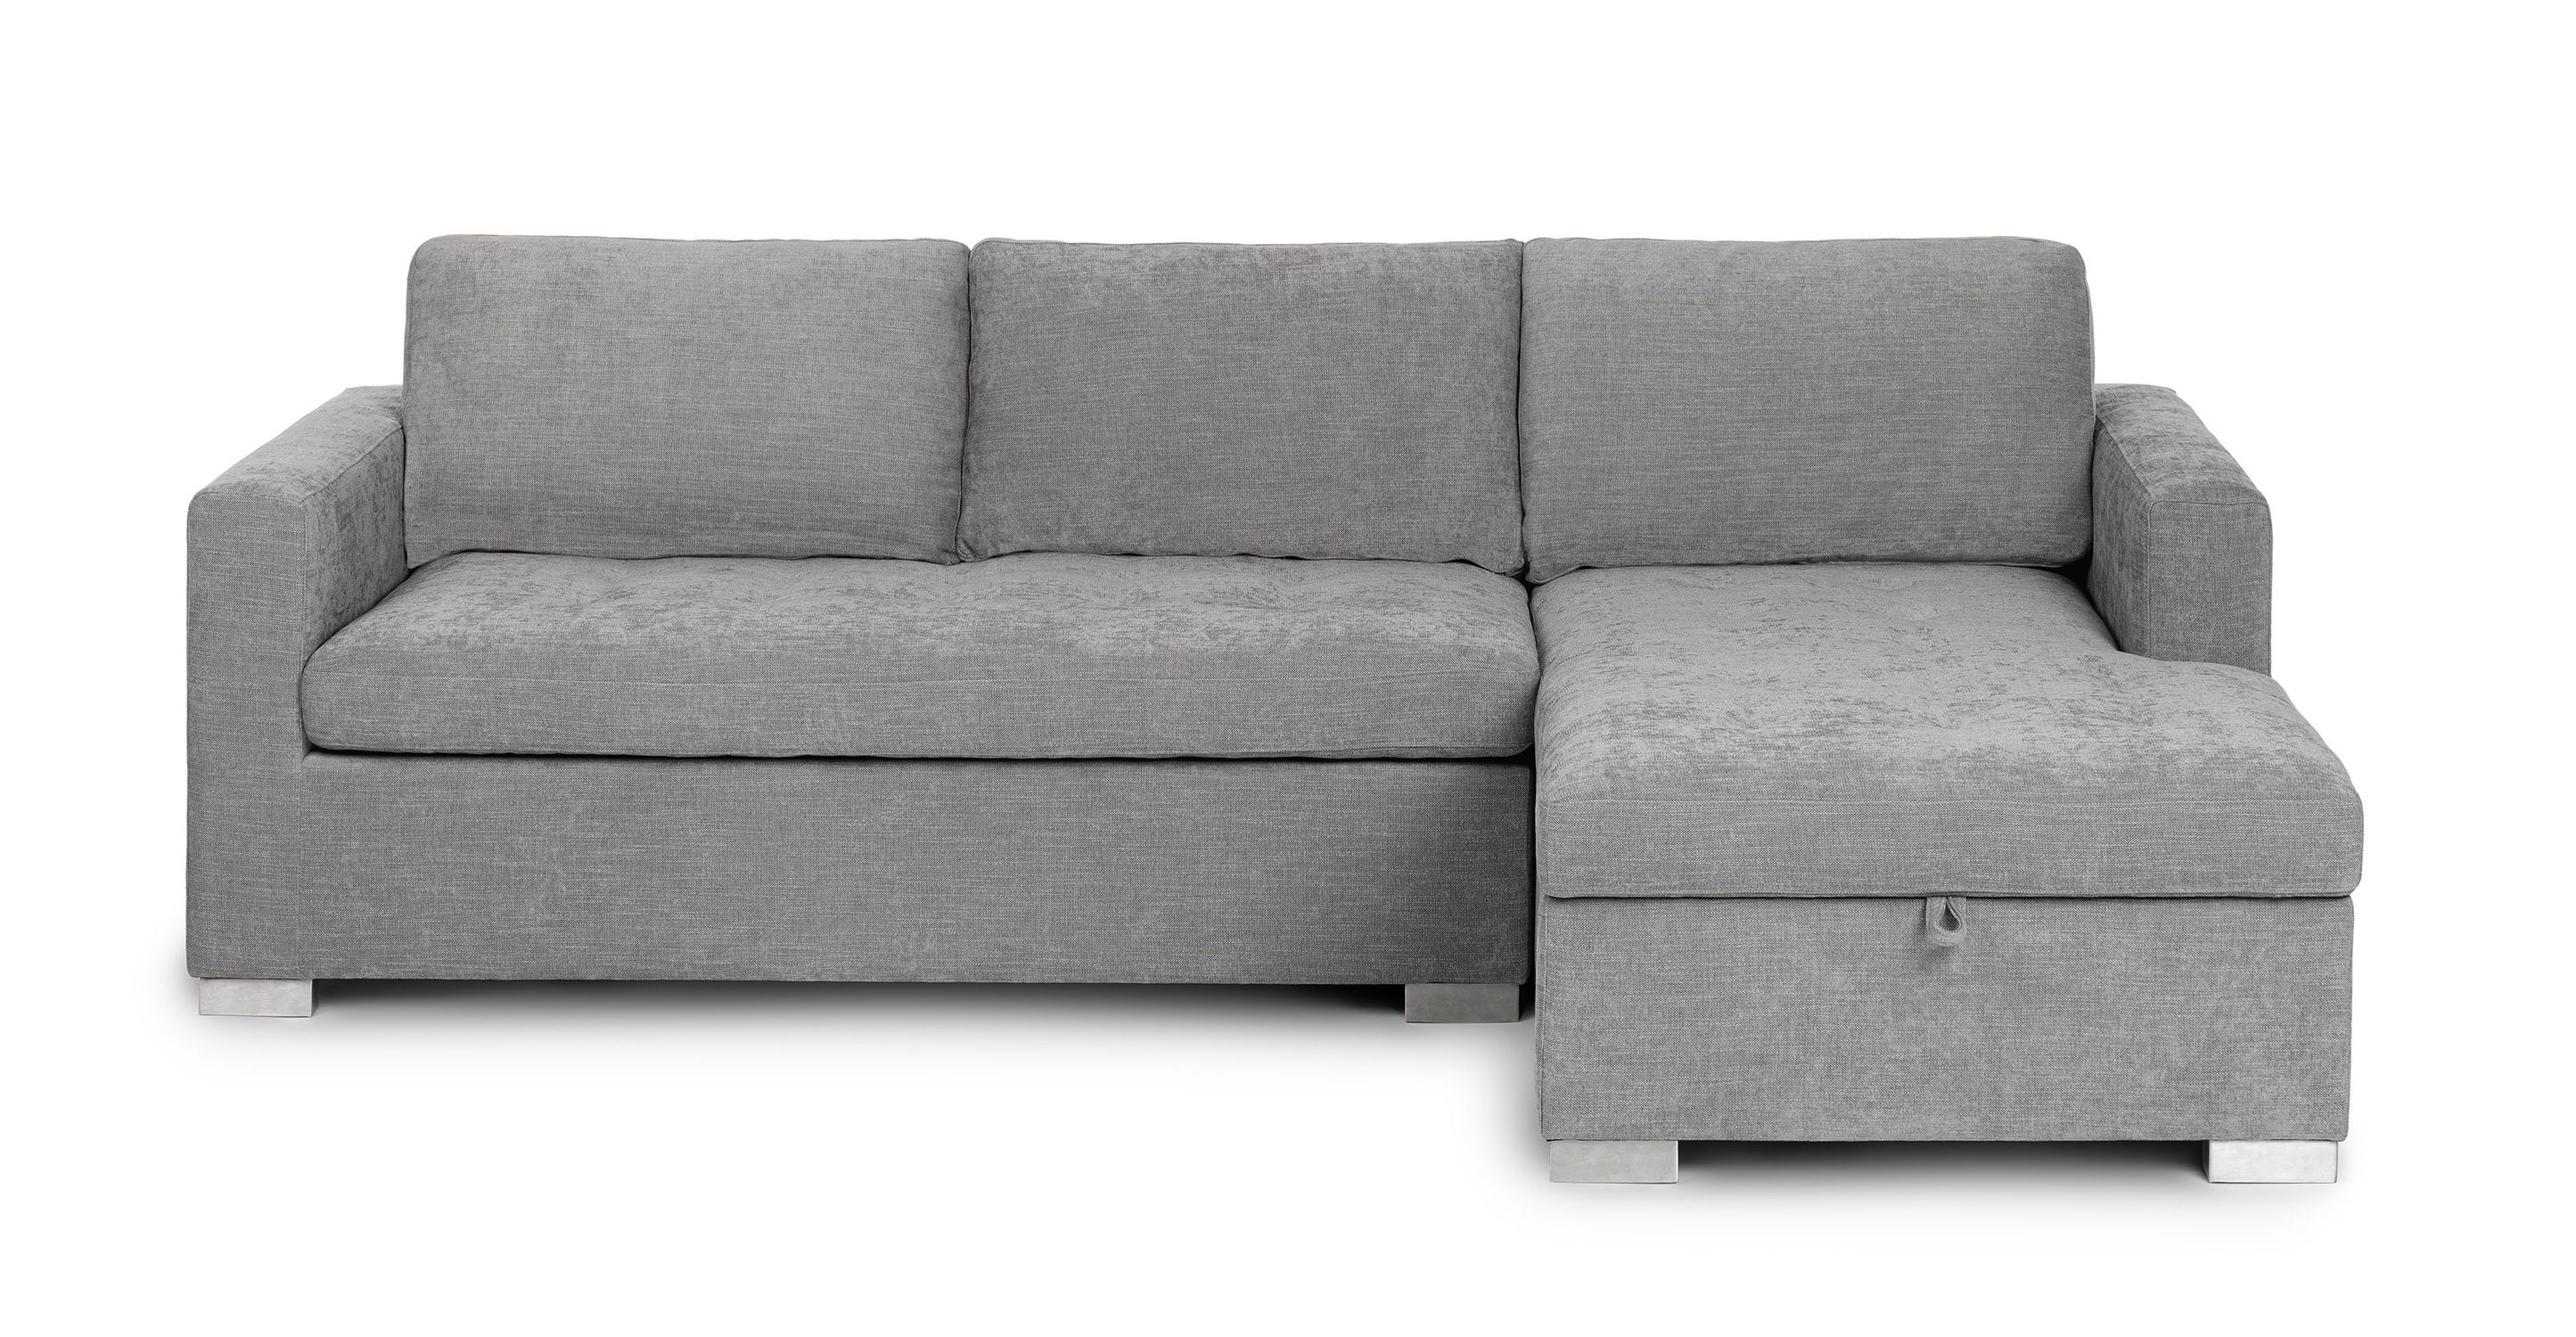 Right Facing Dawn Gray Fabric Sectional Sofa Bed | Soma | Article Pertaining To Left Or Right Facing Sleeper Sectional Sofas (View 16 of 20)